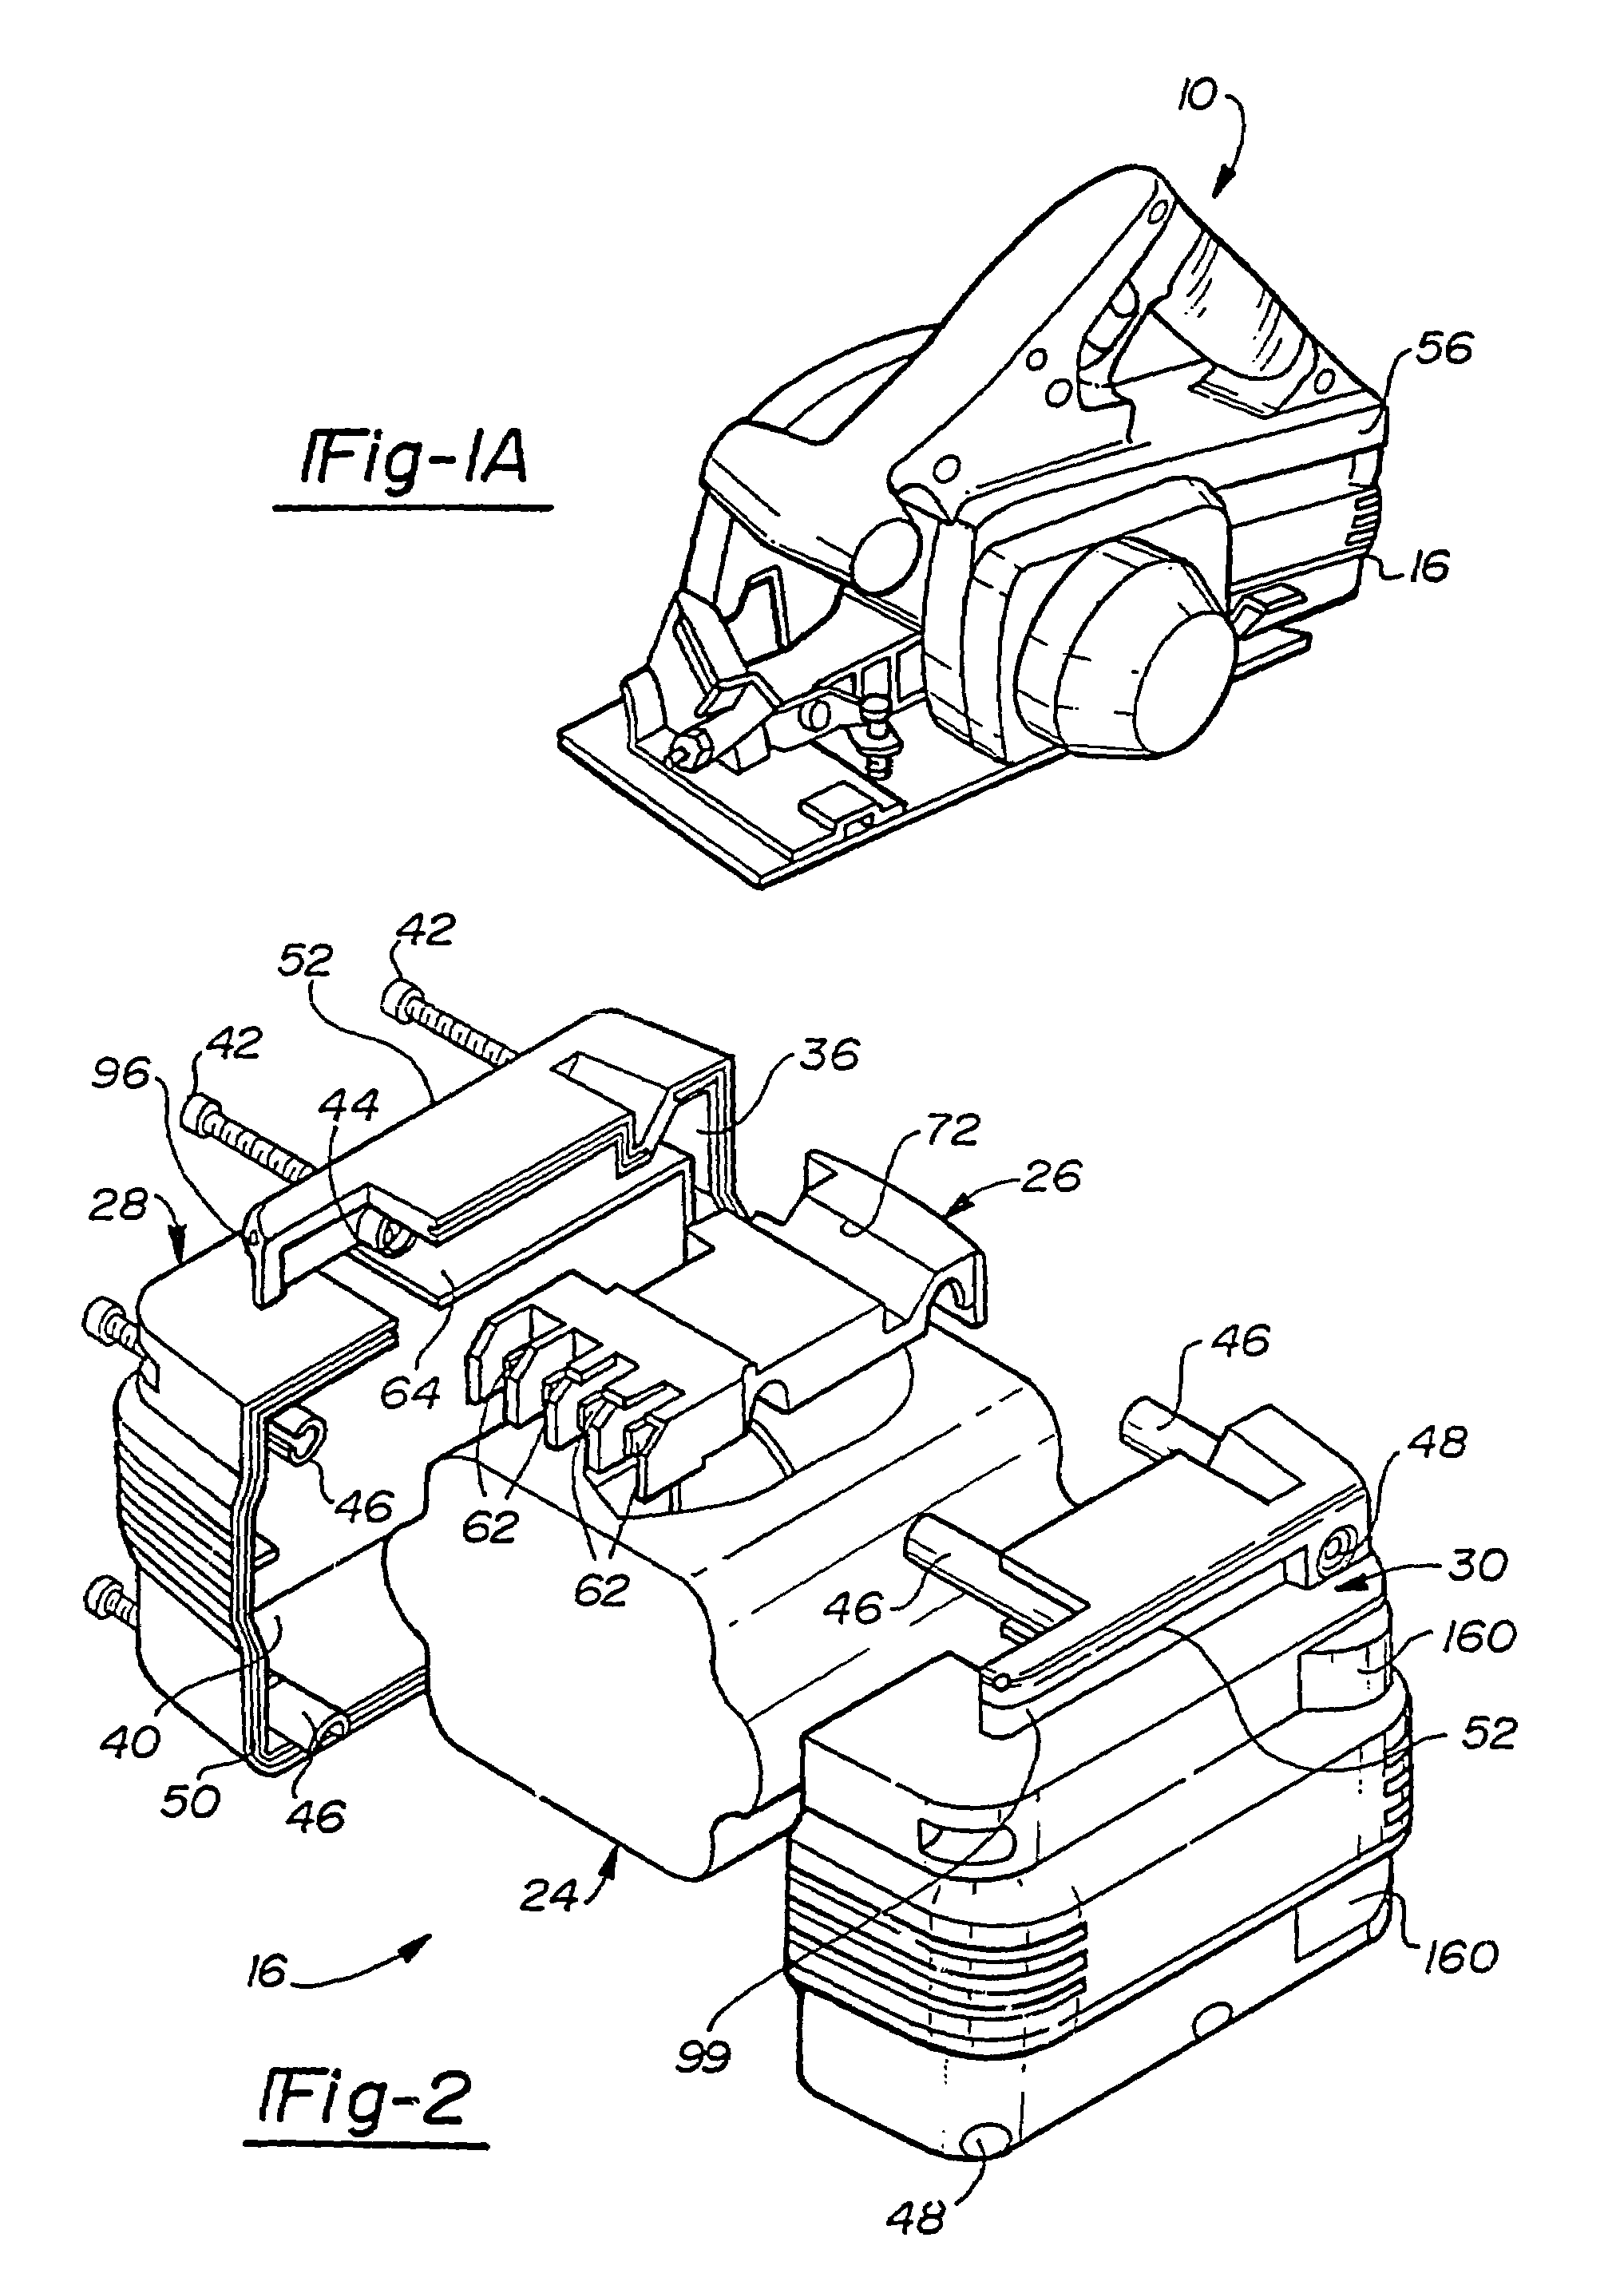 Cordless power tool system utilizing battery pack connection system with guide rails and guide slots